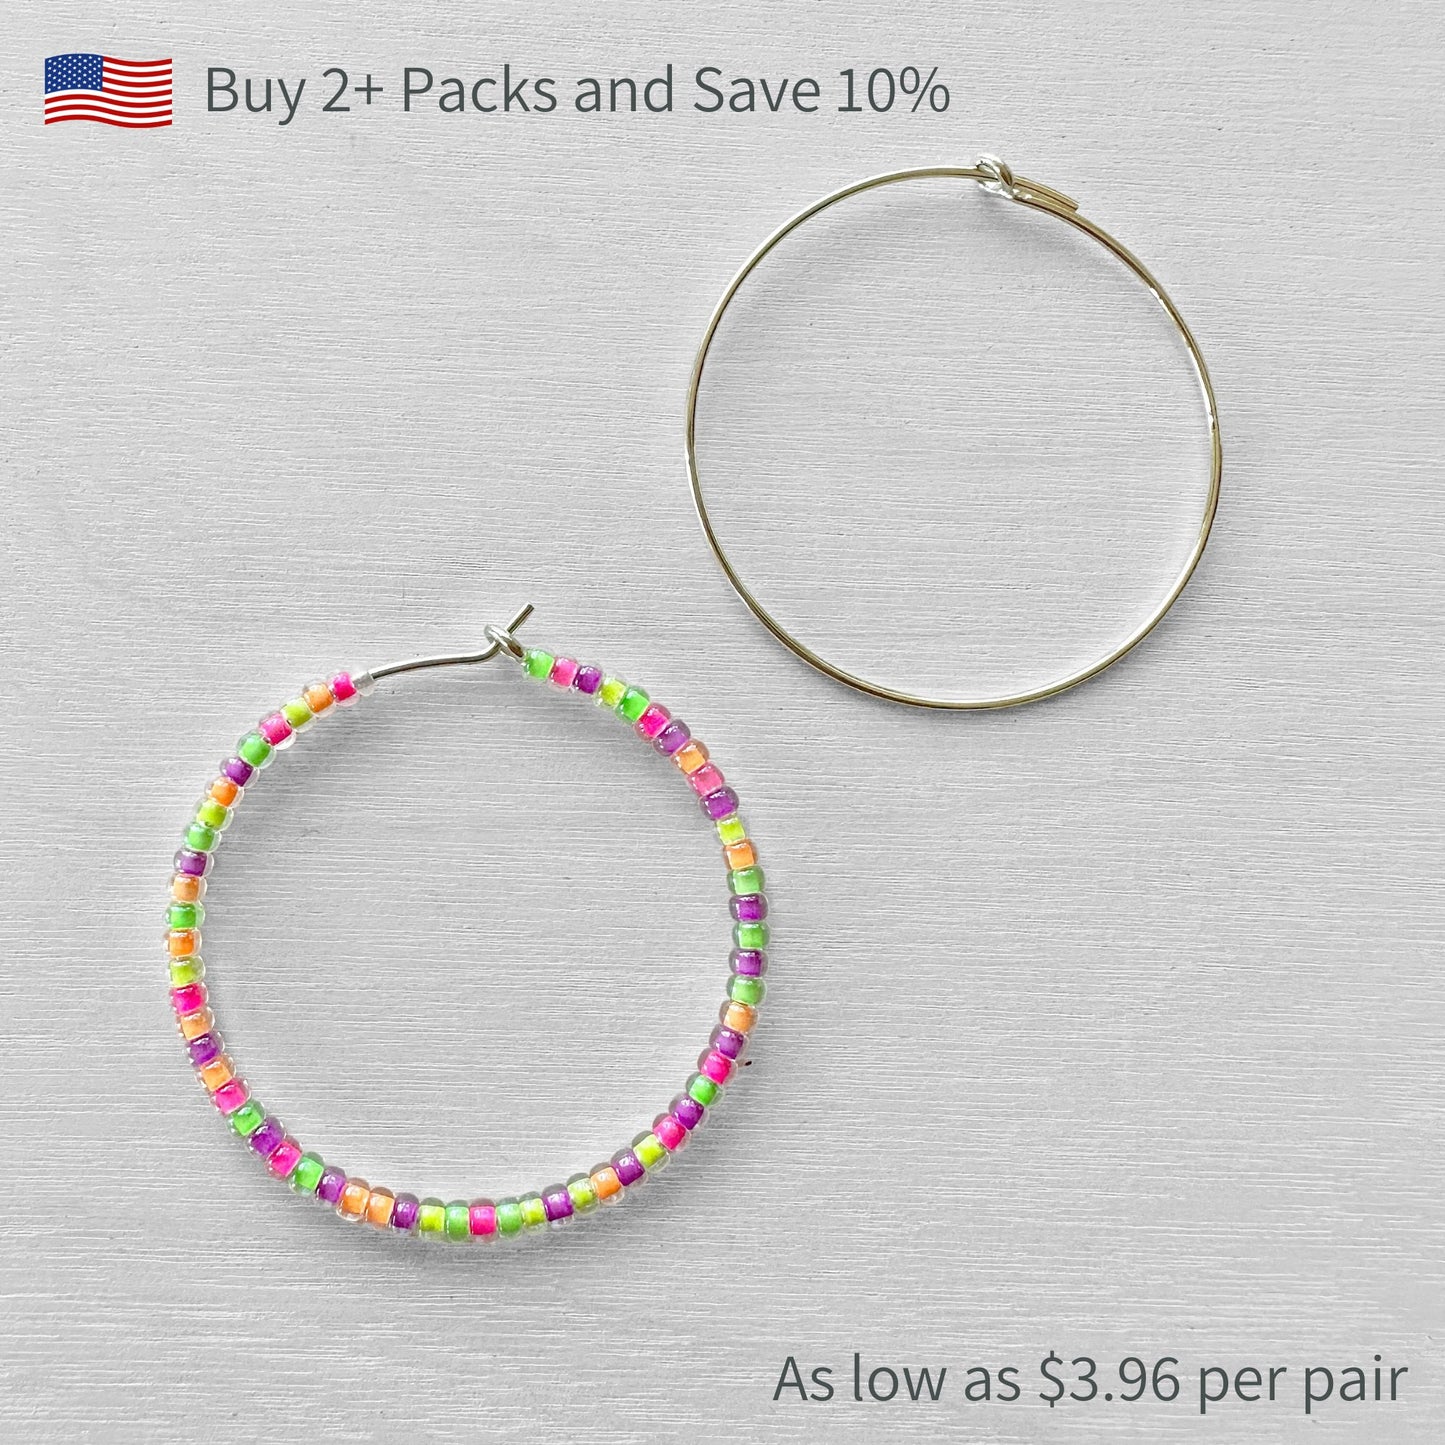 30mm Sterling Silver Beading Hoops - The Bead Mix